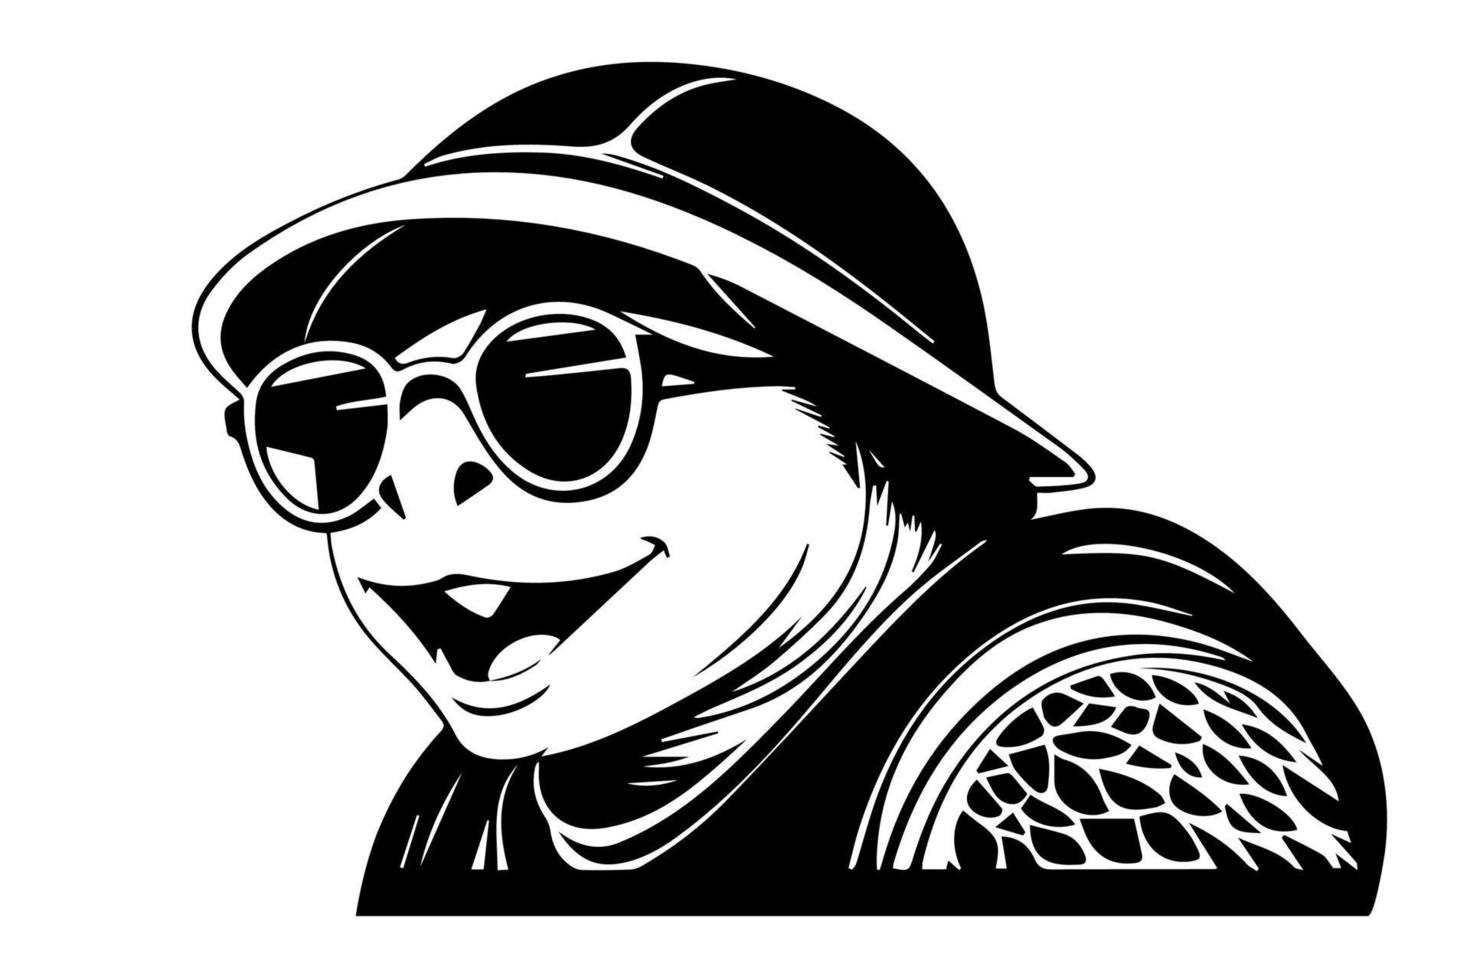 Turtle in a hat and sunglasses. Vector illustration. black and white.